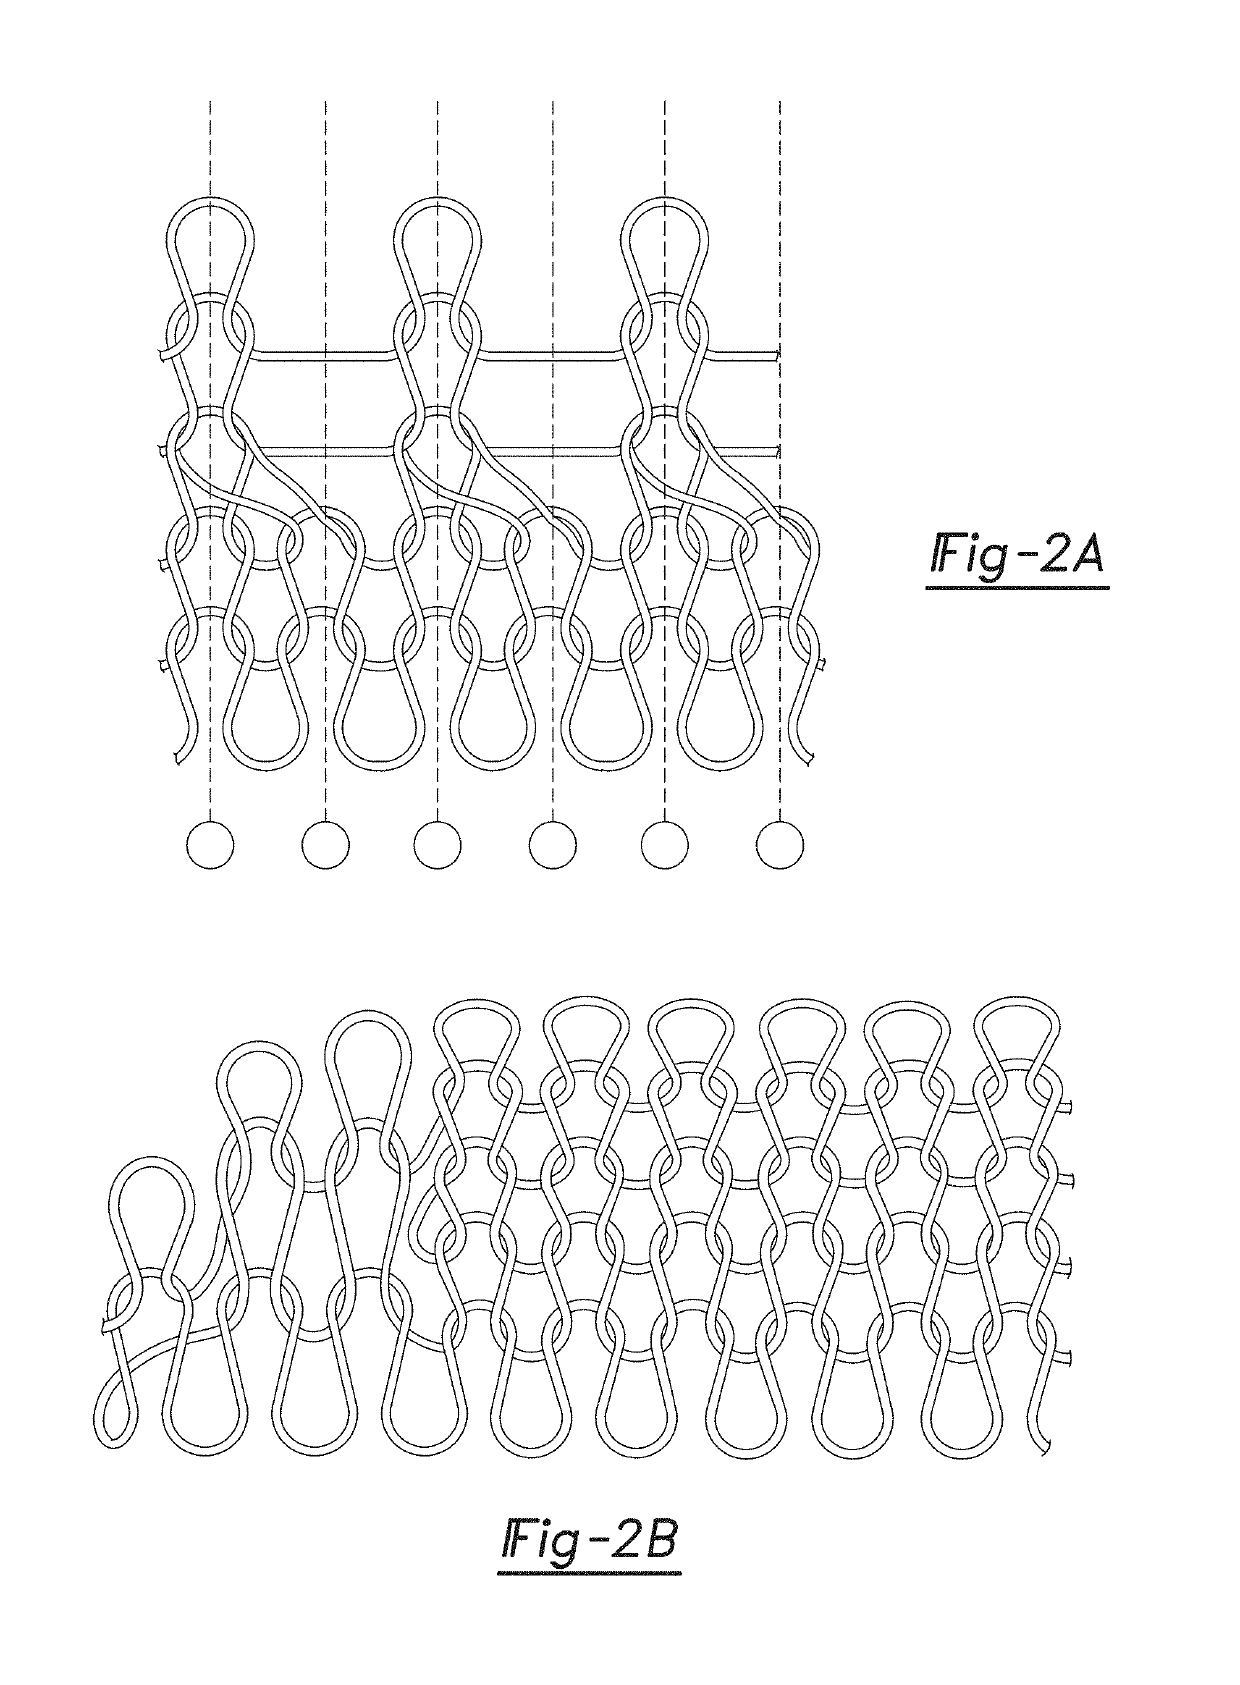 Method For Mass-Customization And Multi-Axial Motion With A Knit-Constrained Actuator